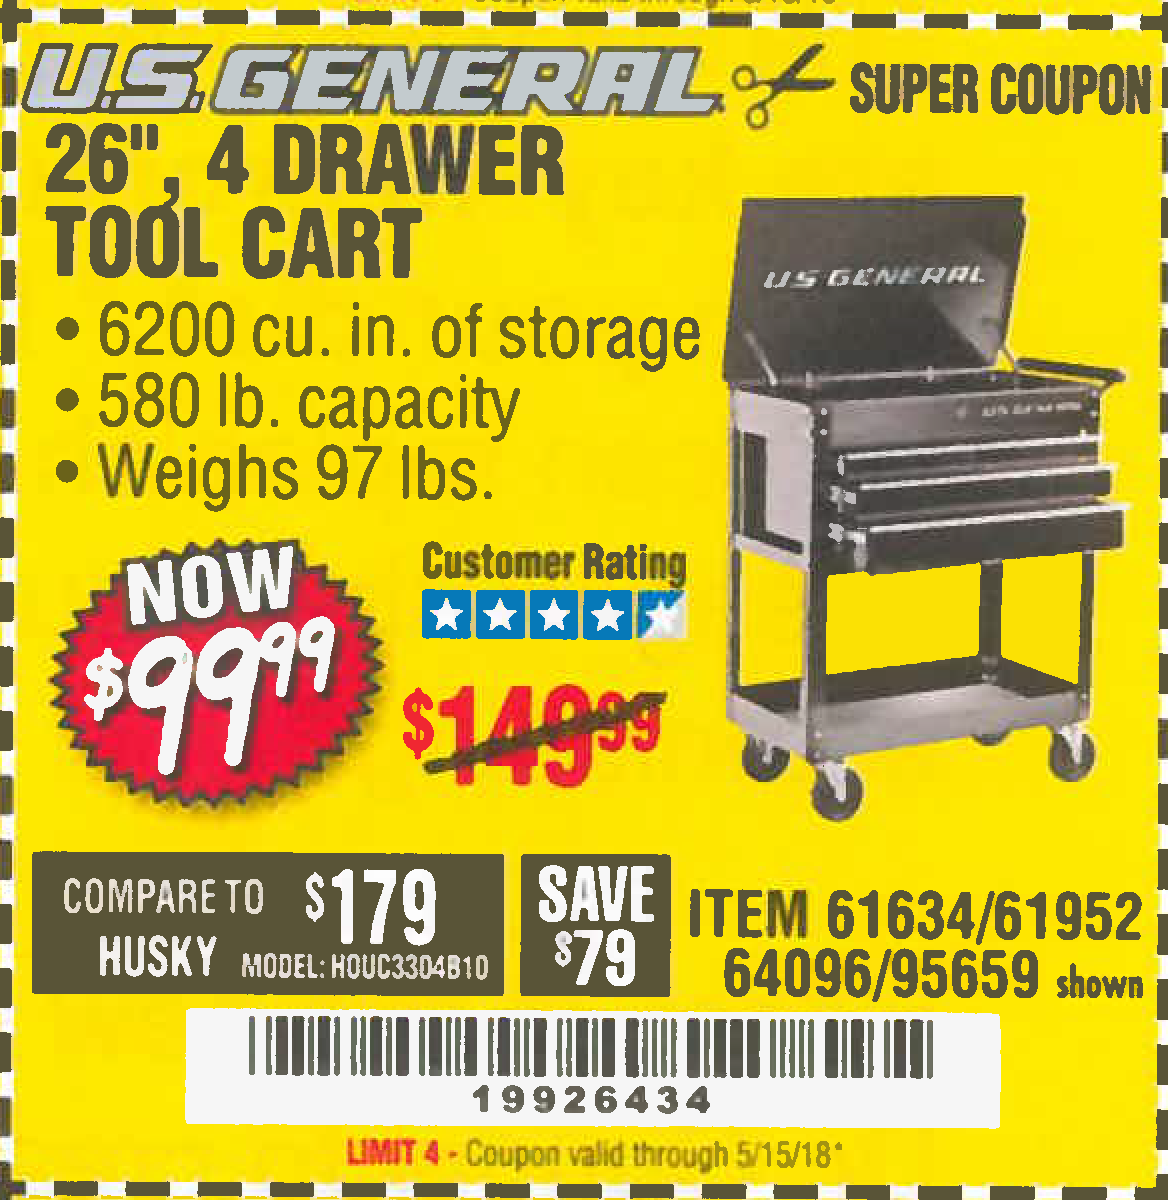 Harbor Freight Tools Coupon Database Free Coupons 25 Percent